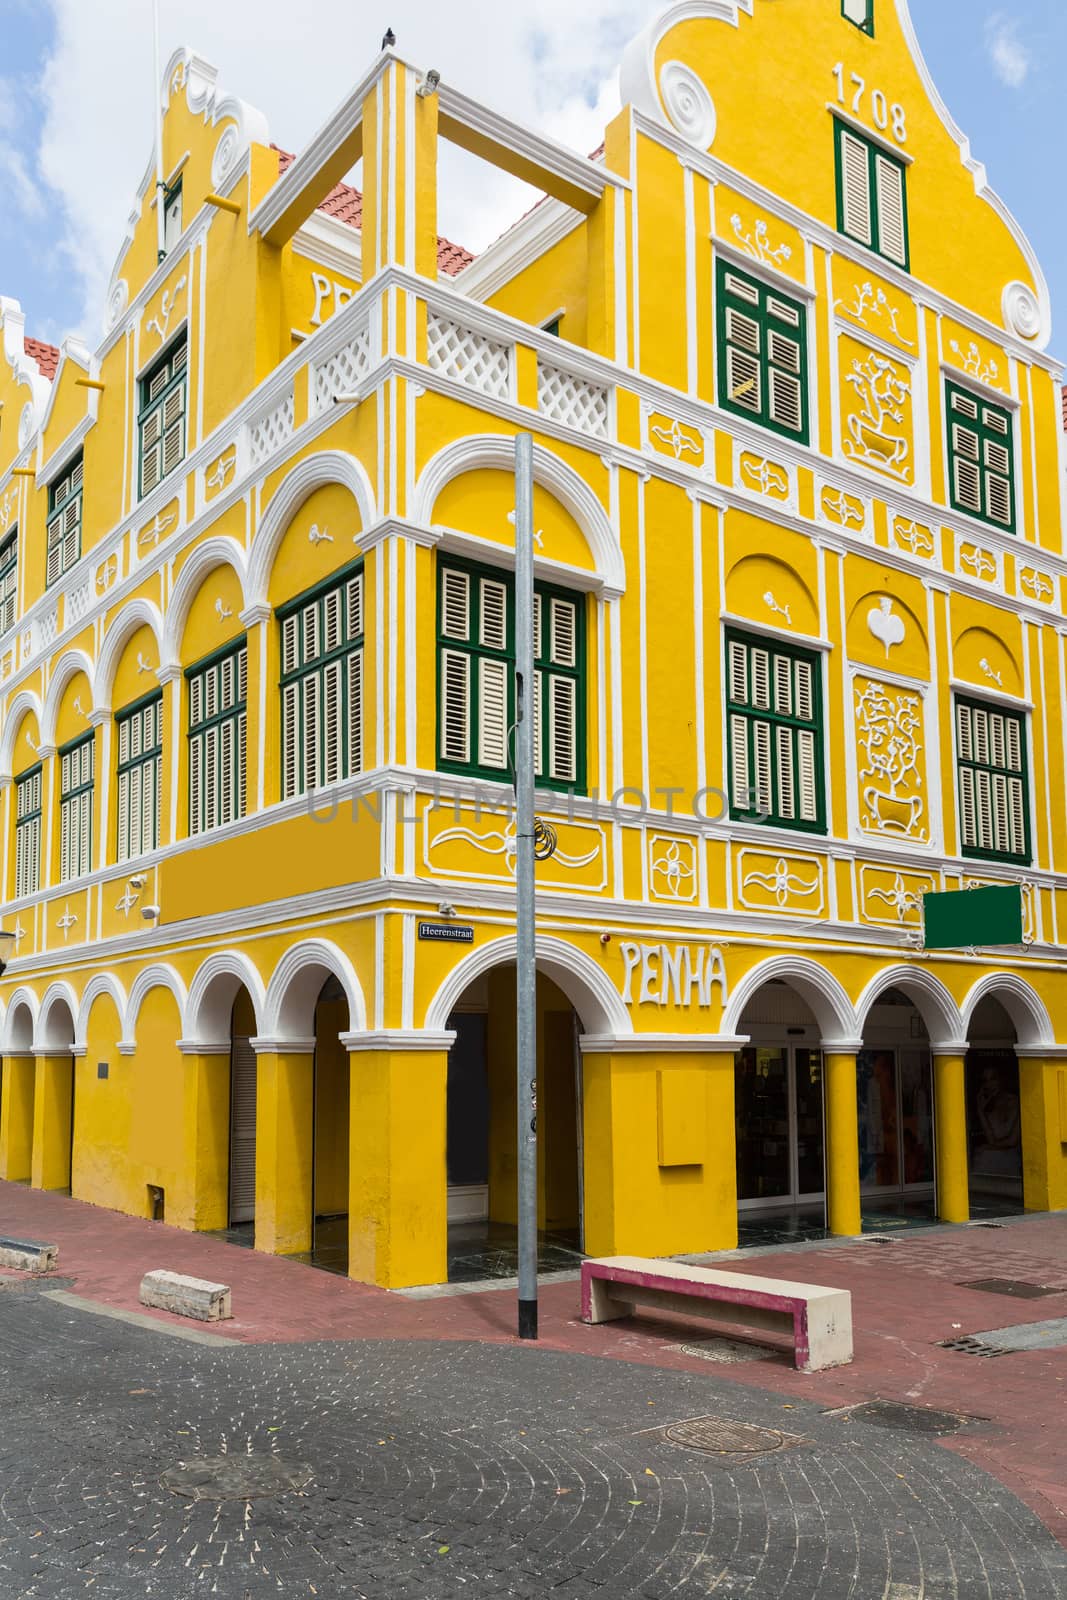 Downtown Willemstad in the Dutch Antilles of Curacao